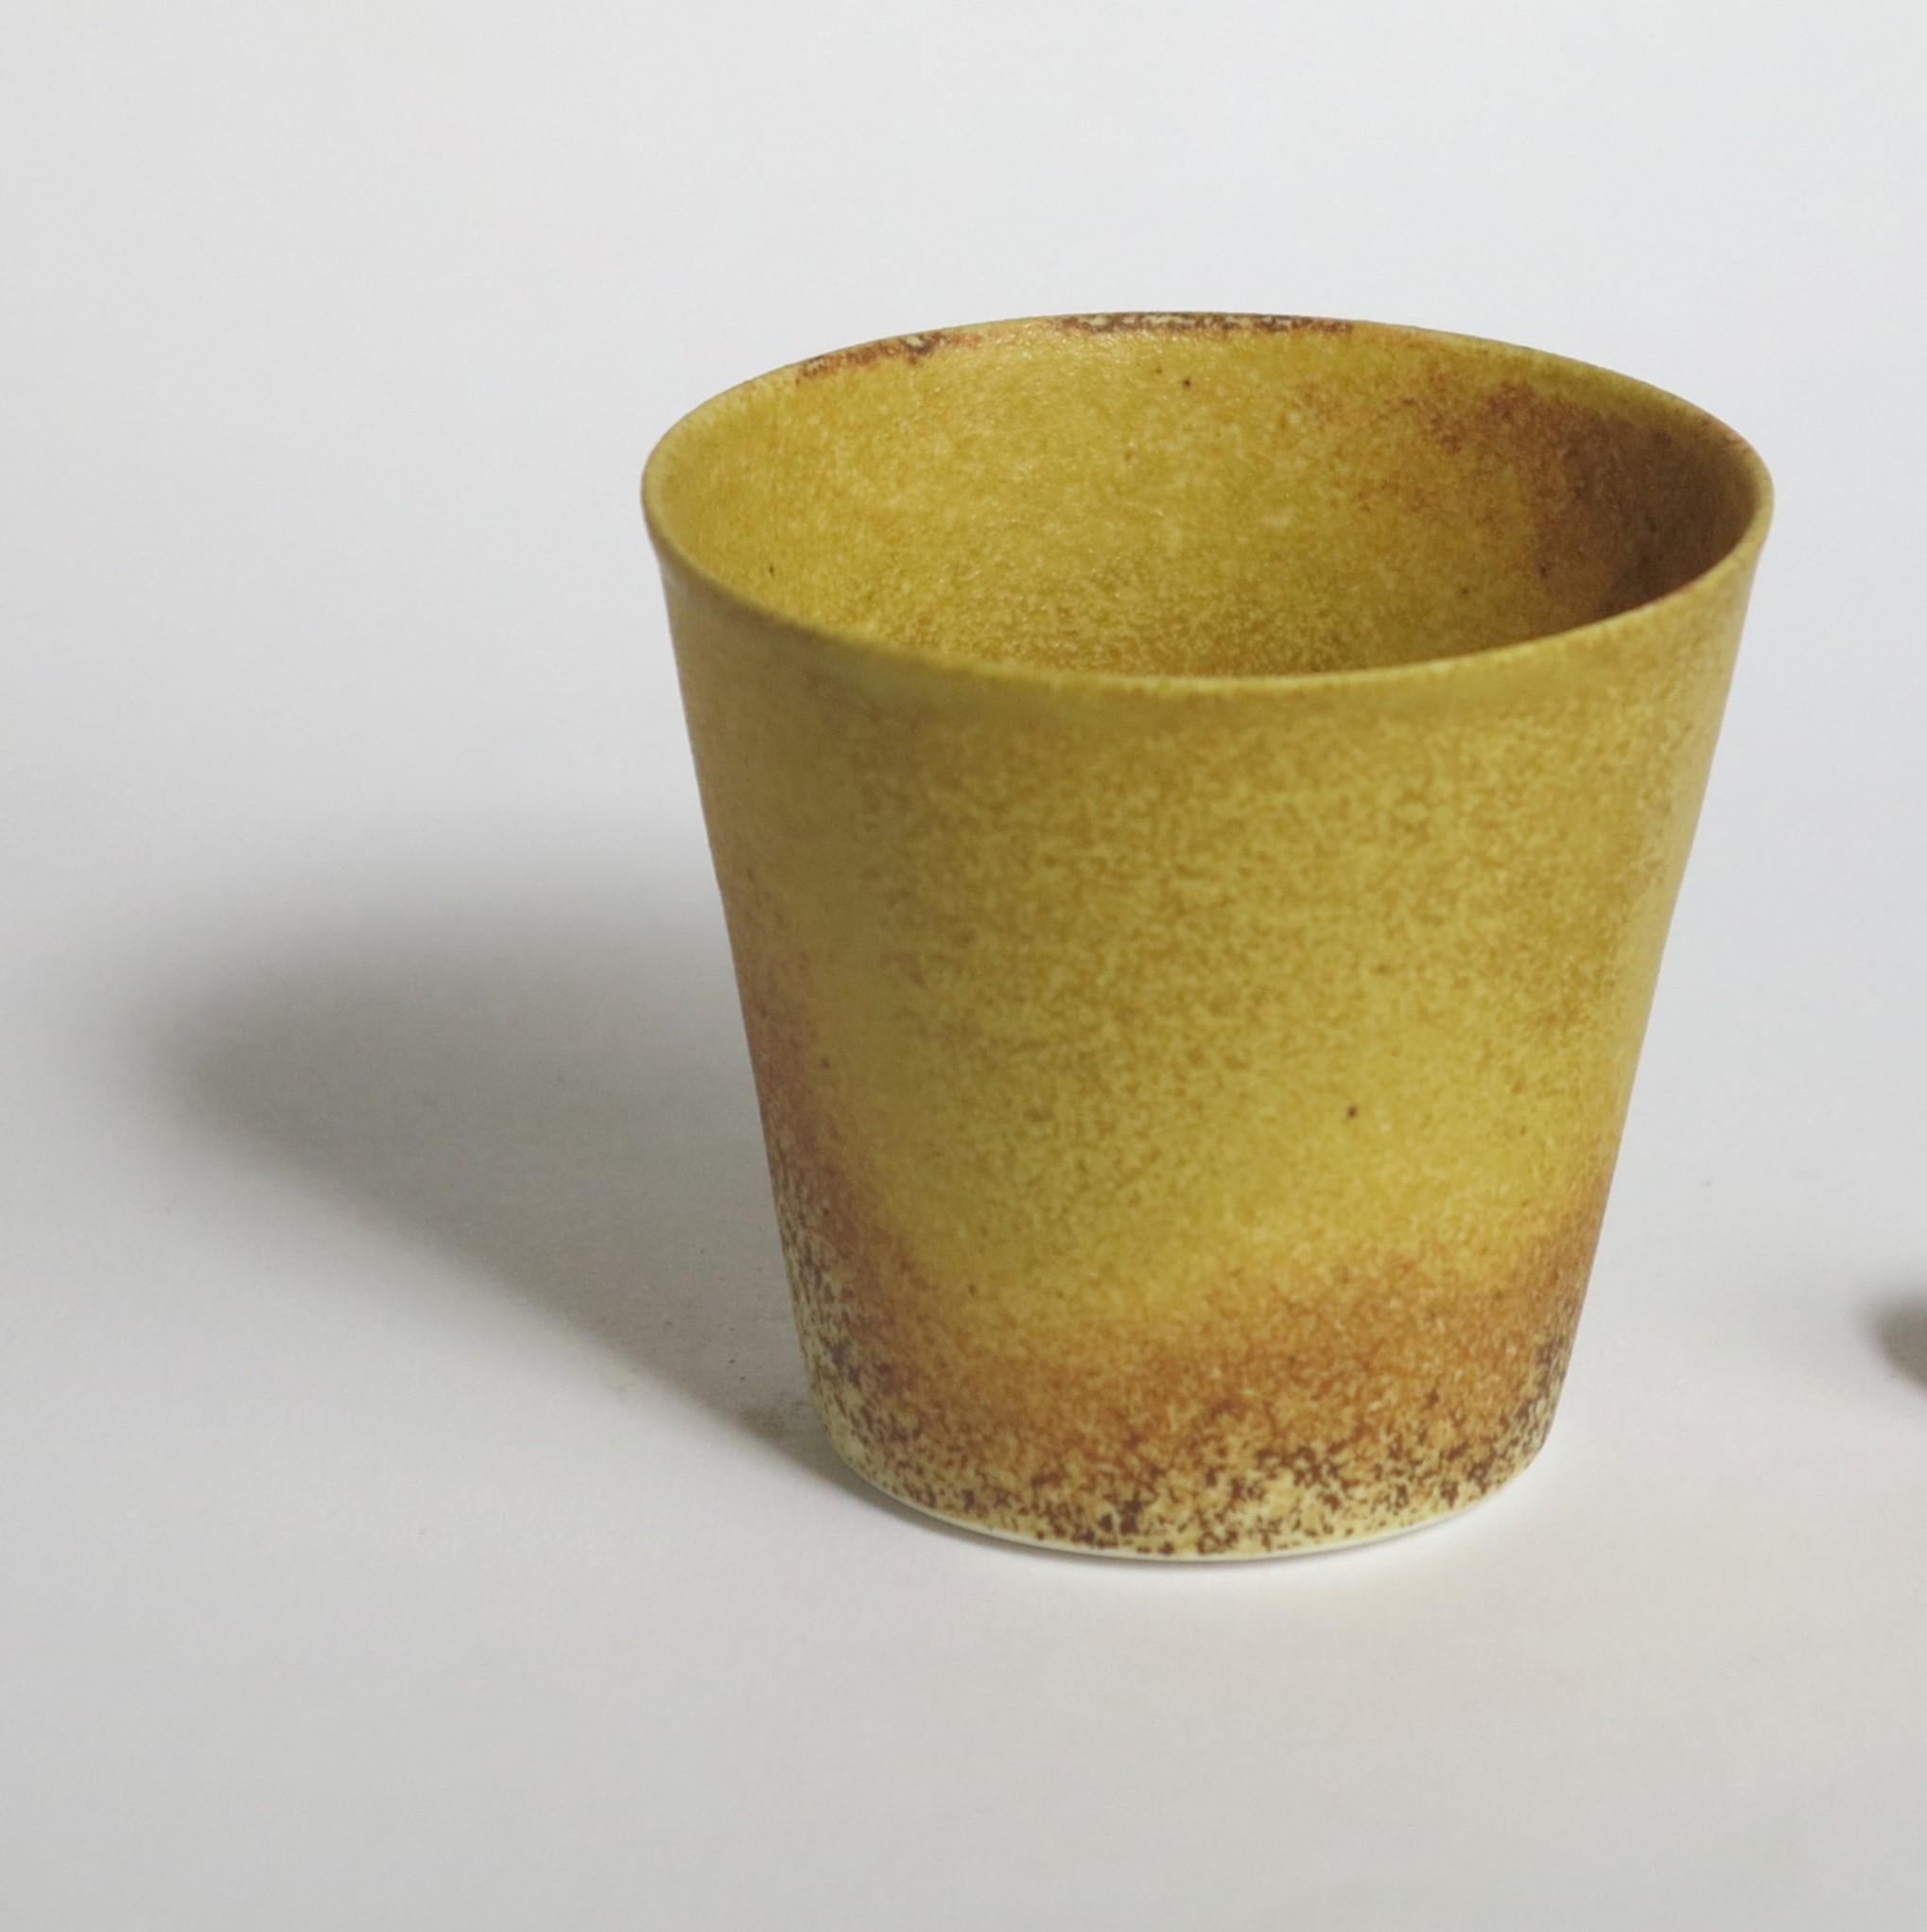 Set of 4 porcelain yellow coffee cups by Cica Gomez
Price for set of 4.
Dimensions: Ø 6.5 x H 6 cm
Materials: Porcelain

Usual objects. My work is first driven by the search for the line. The one that it draw when the object takes shape and